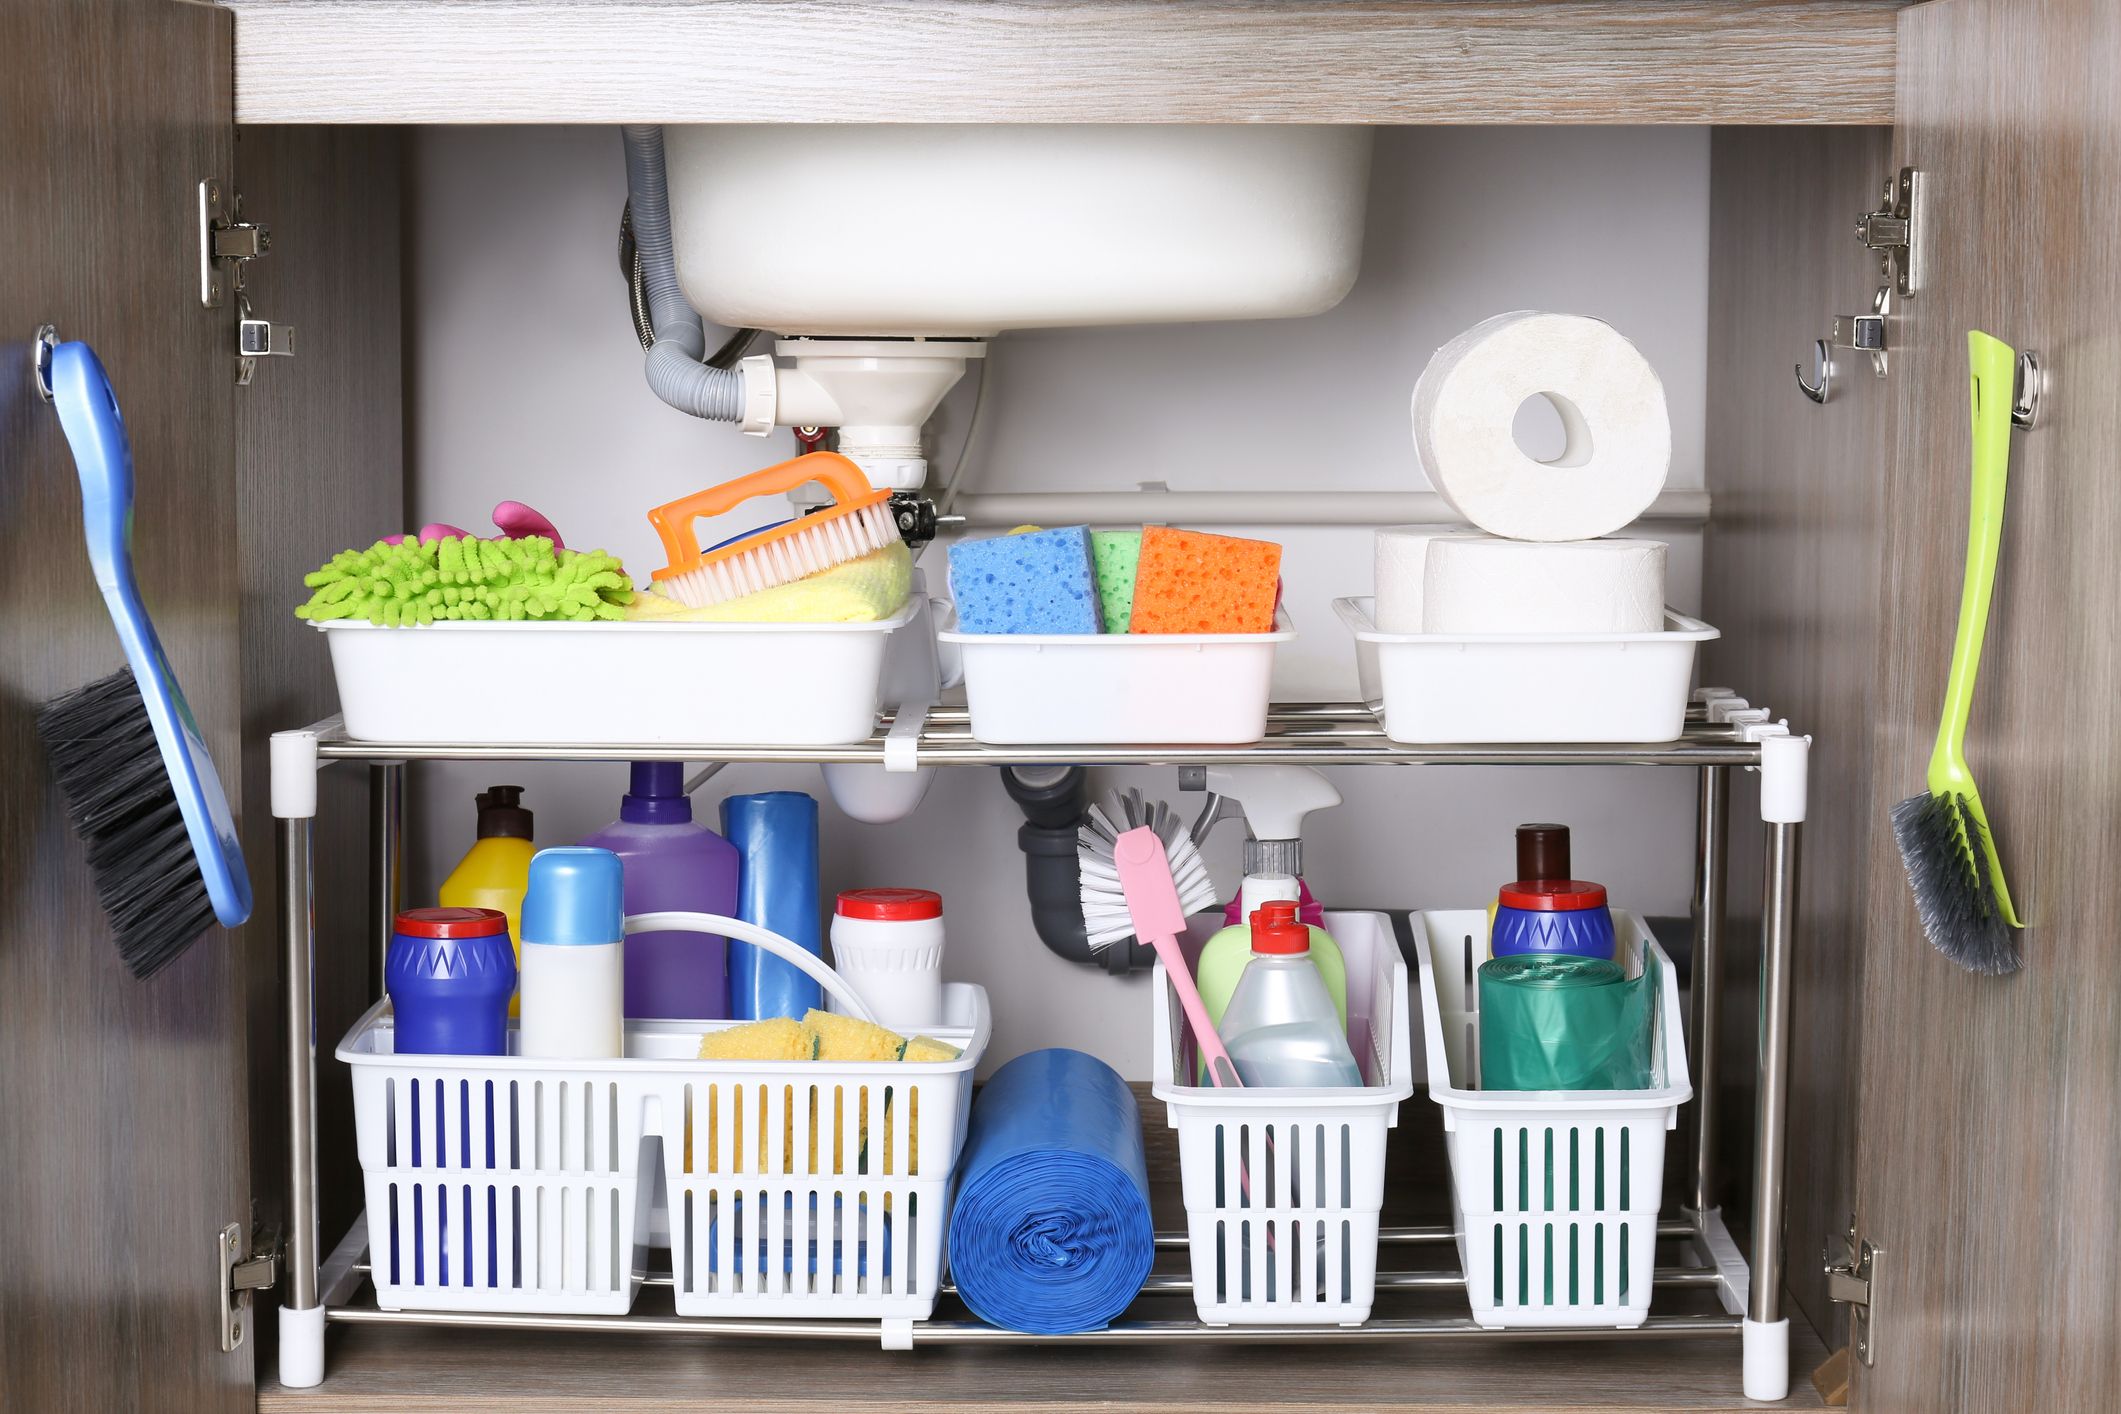 How To Best Organize & Store Your Cleaning Supplies